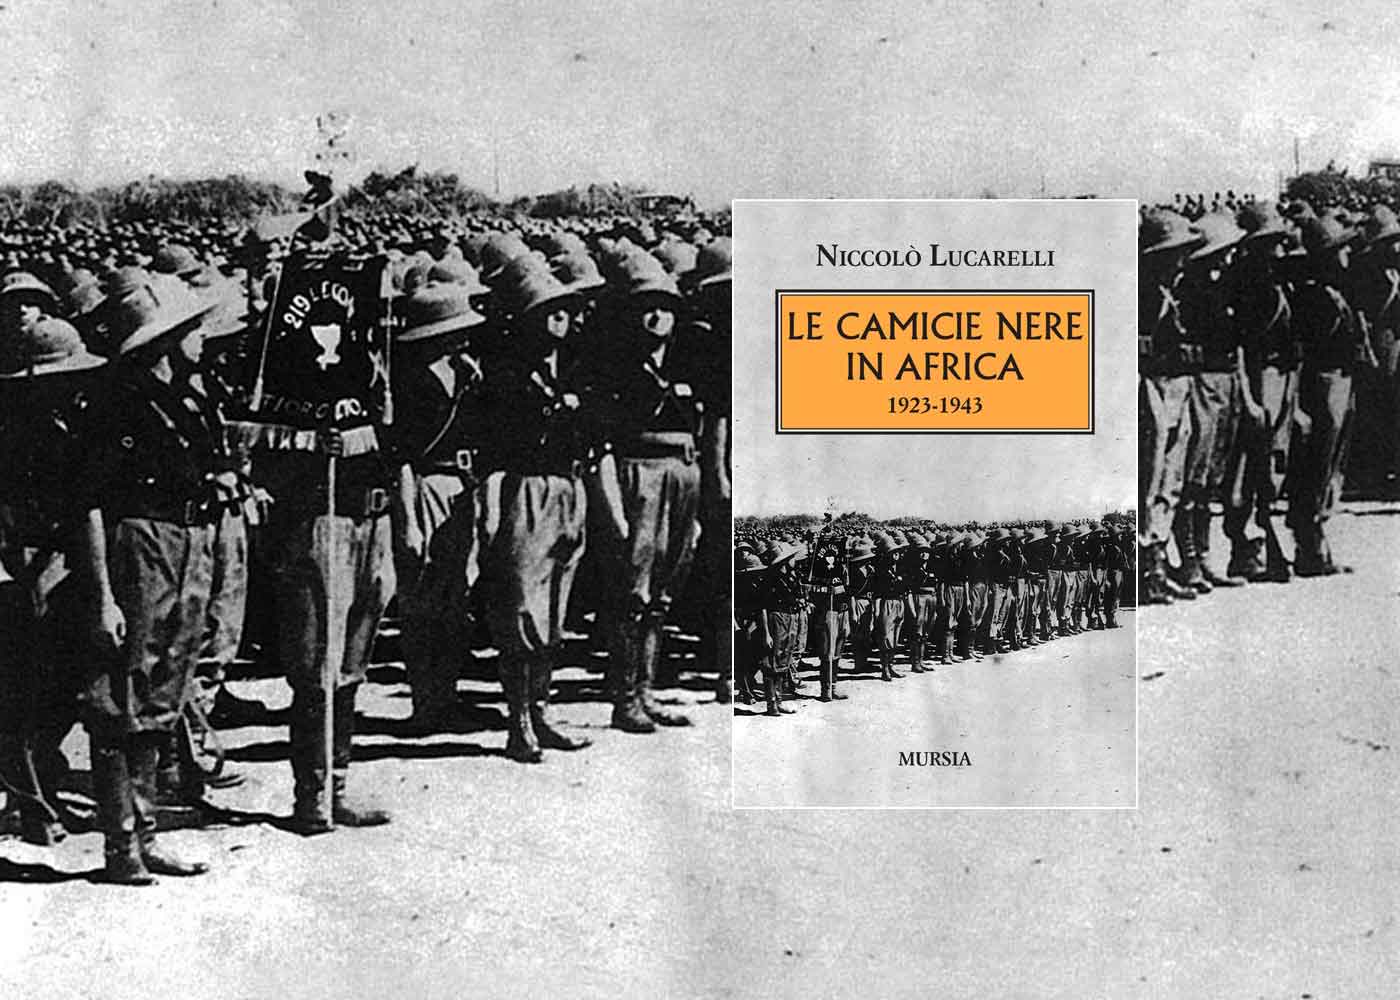 Le camicie nere in Africa. 1923-1943